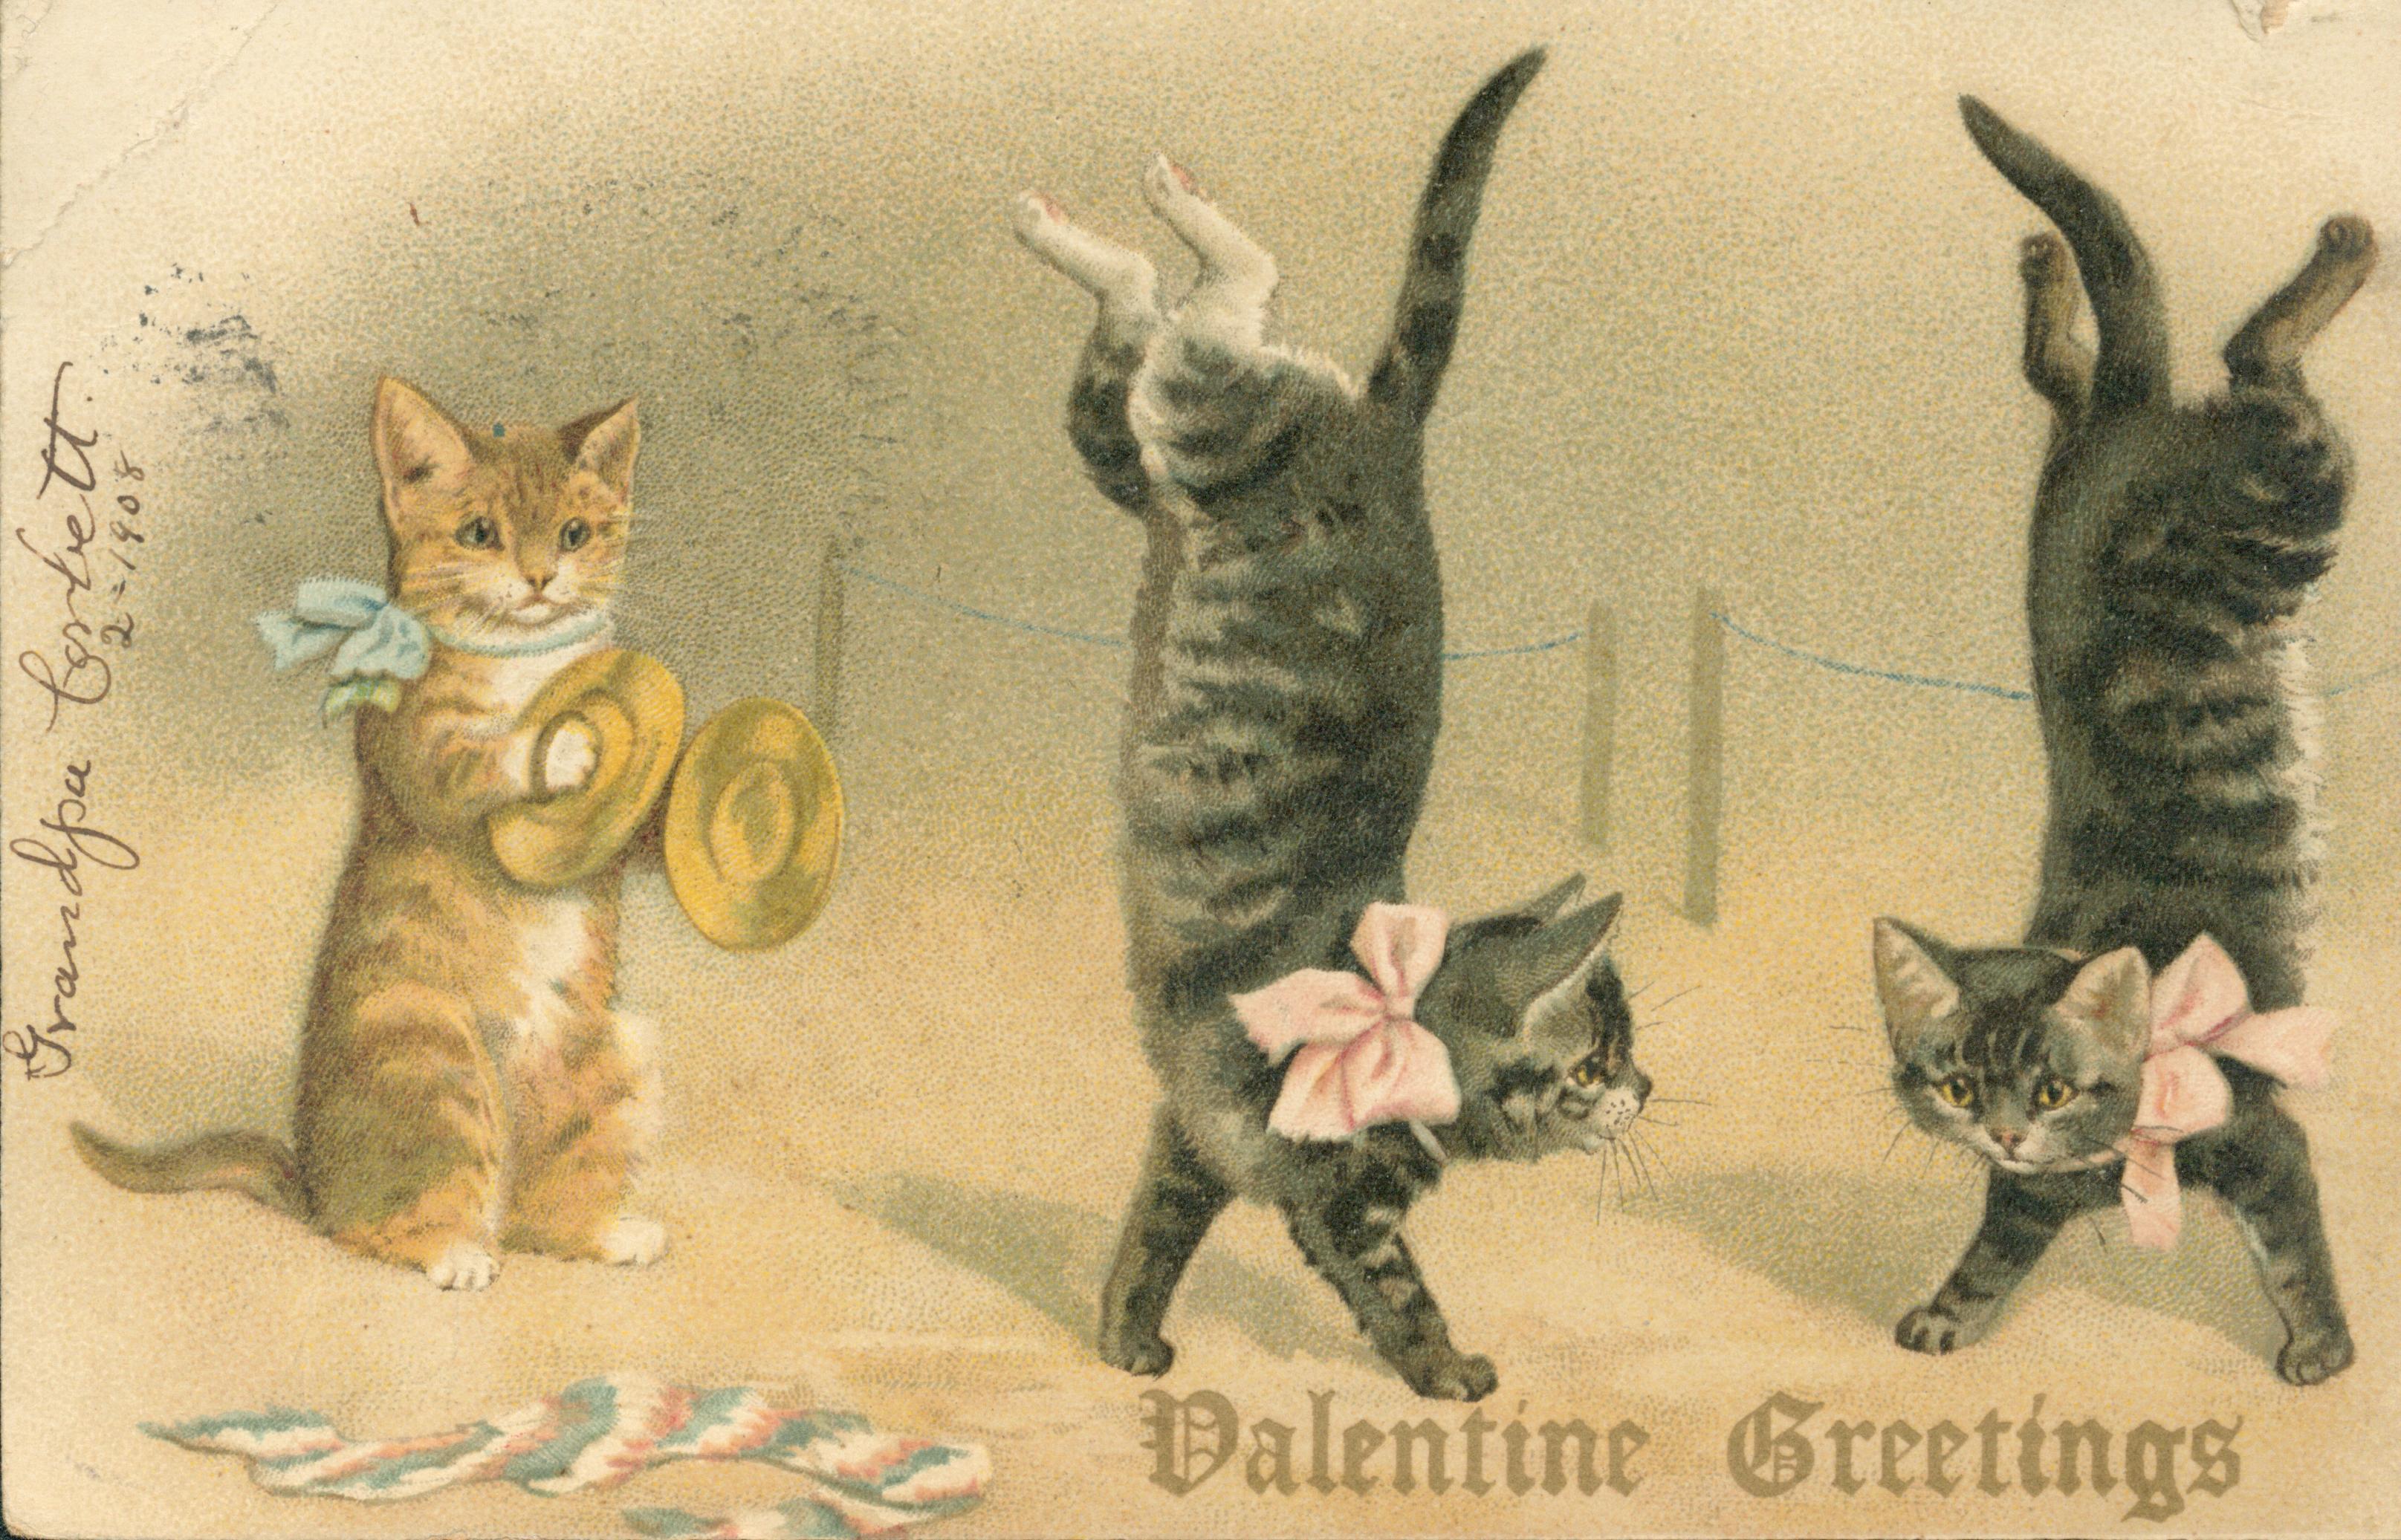 Shows a kitten playing the tambourines for two other kittens